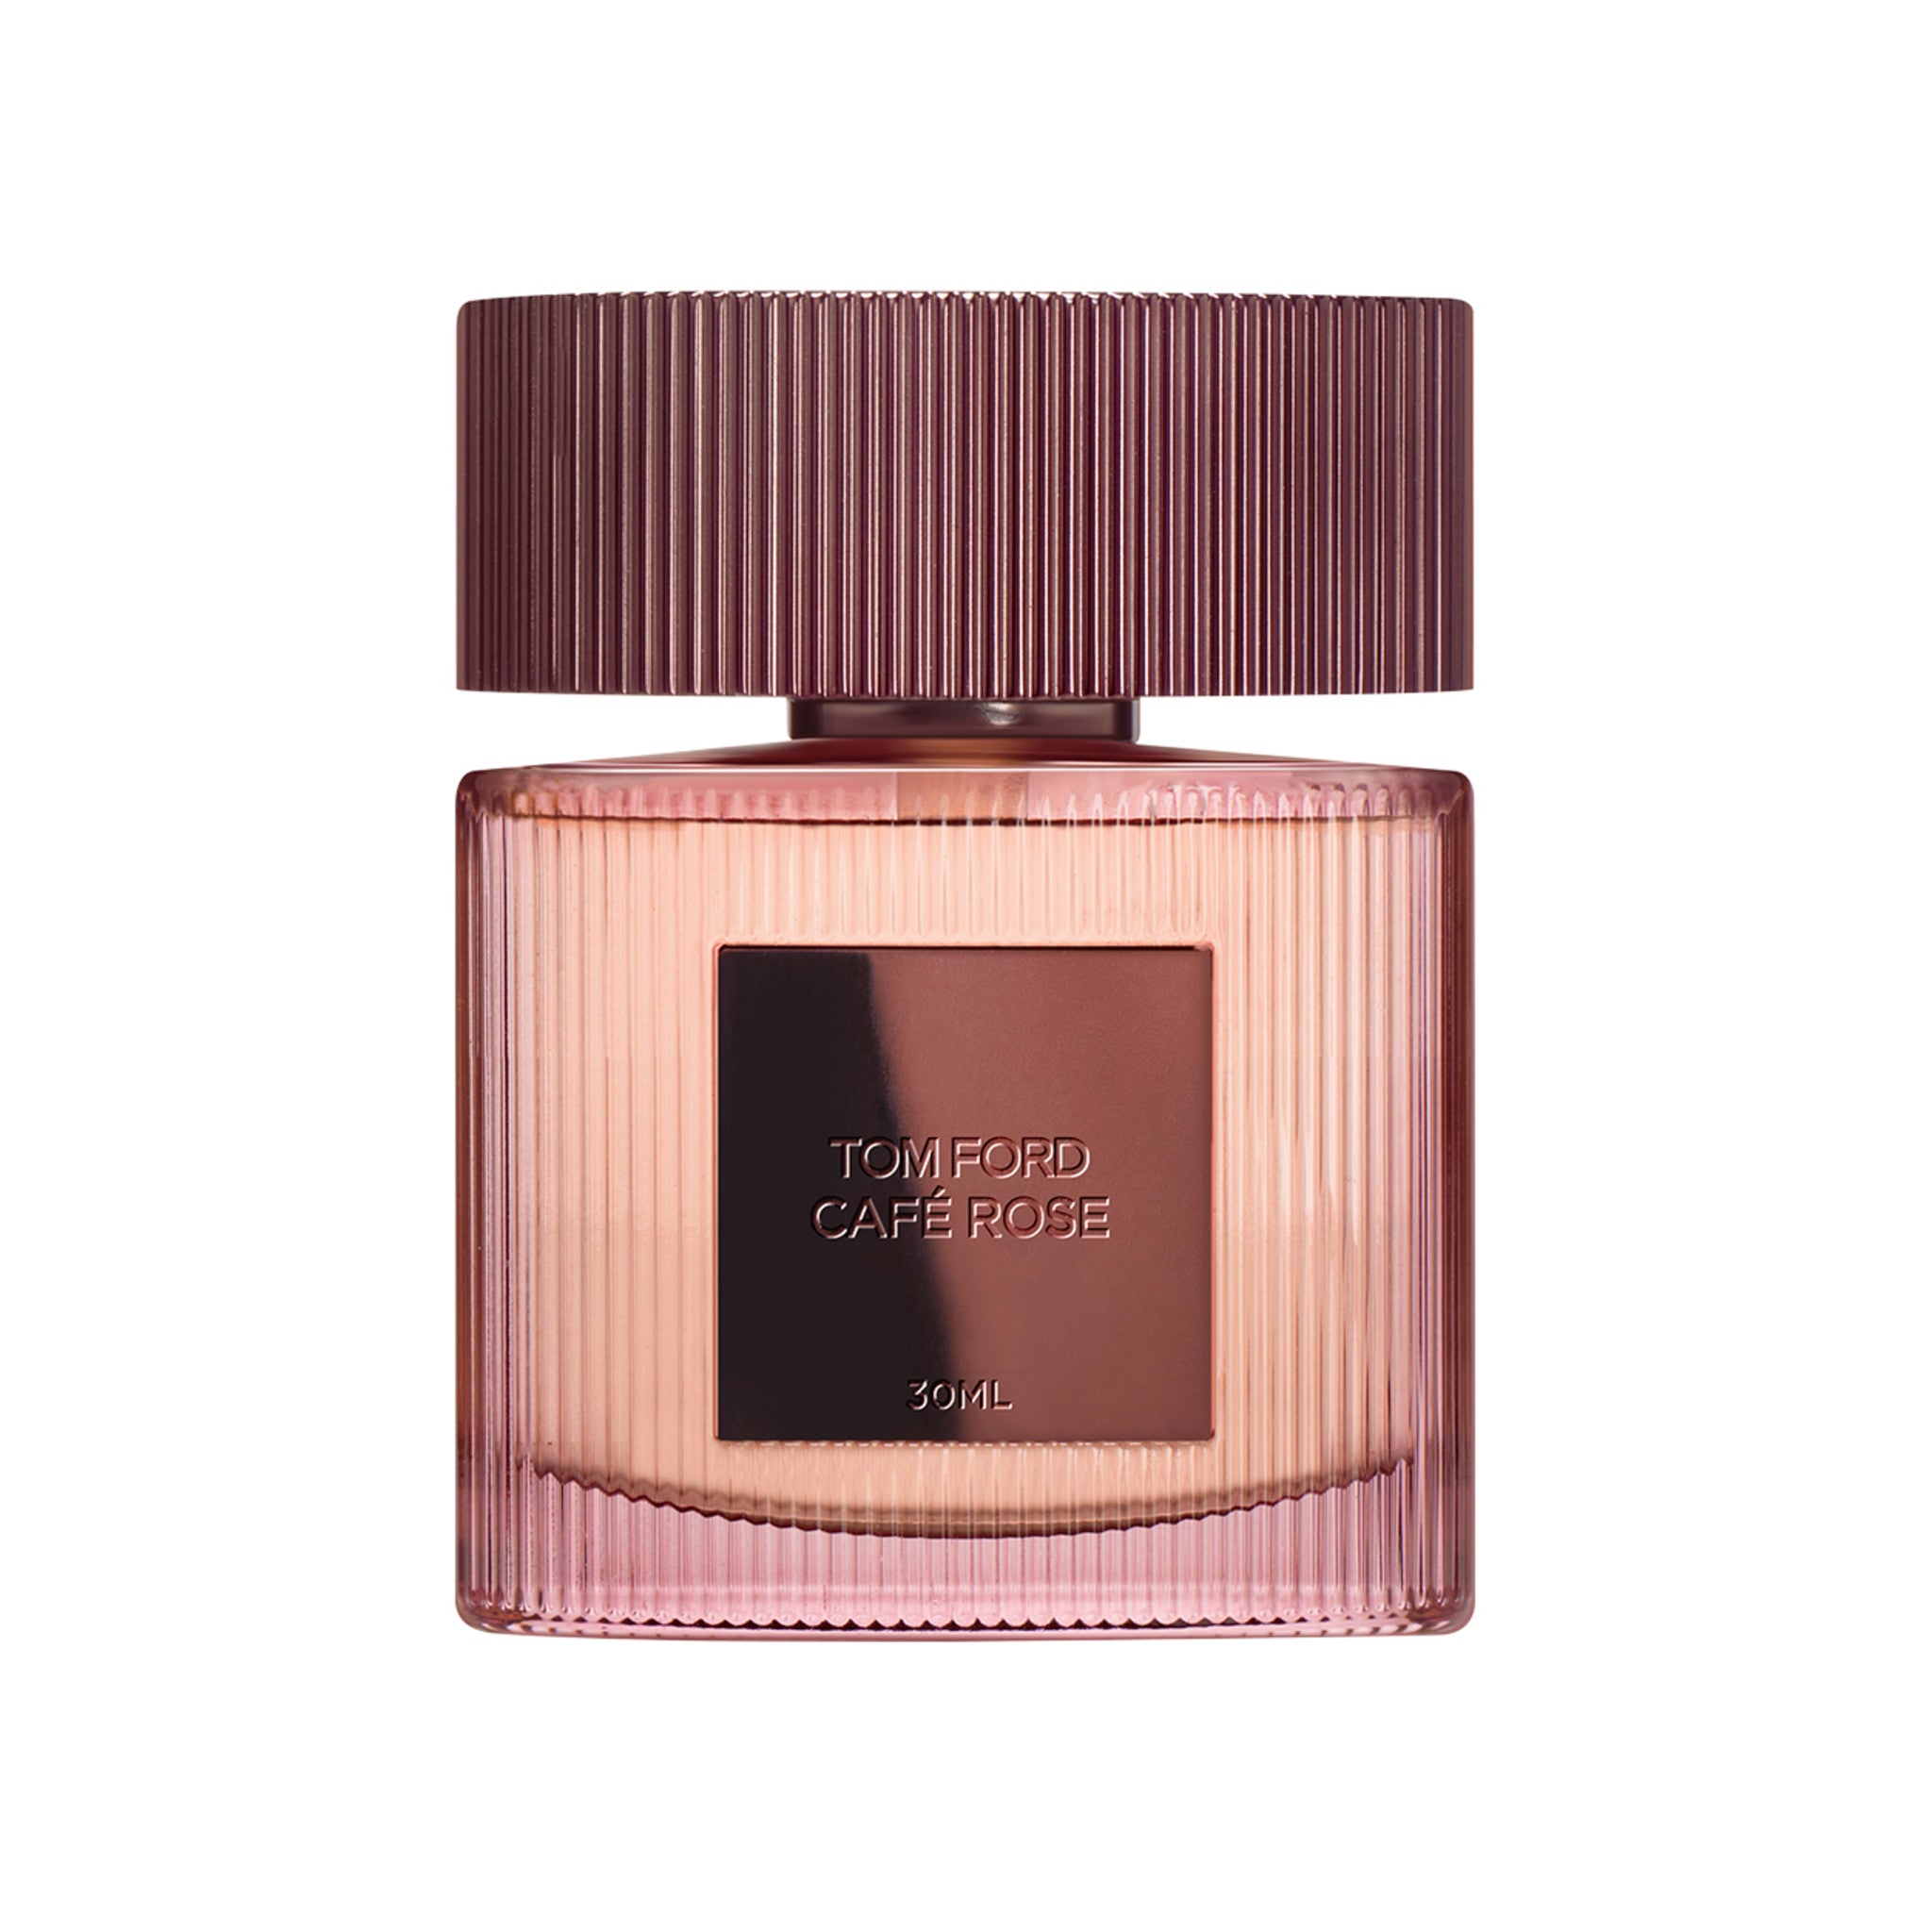 Our Impression of Ombre Leather 16 by Tom Ford-Perfume-Oil-by